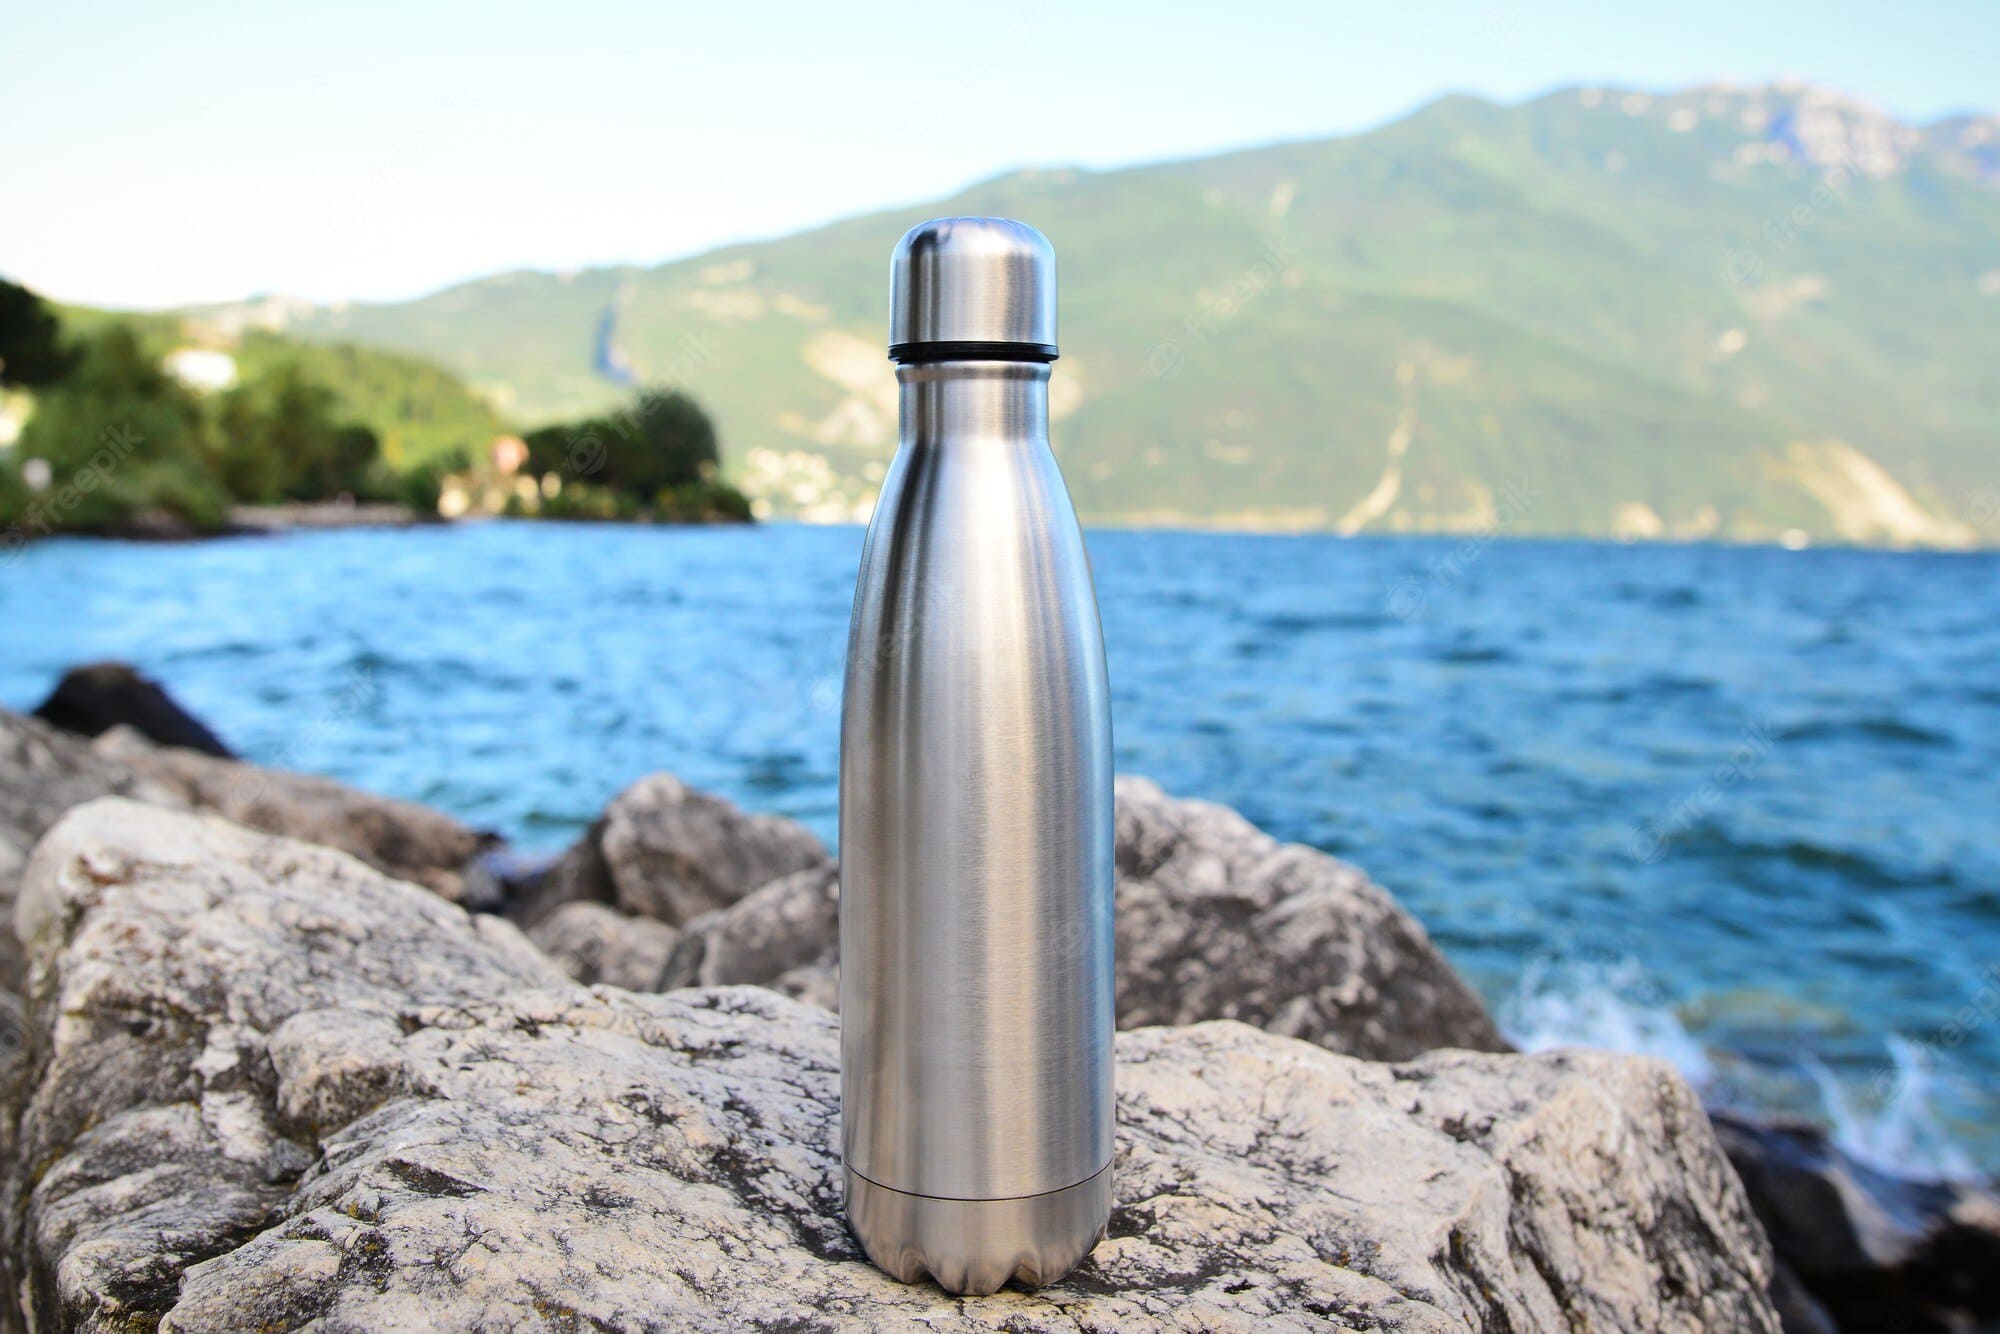 steel-eco-thermo-water-bottle-wall-lake-mountains-be-plastic-free_234039-305-2